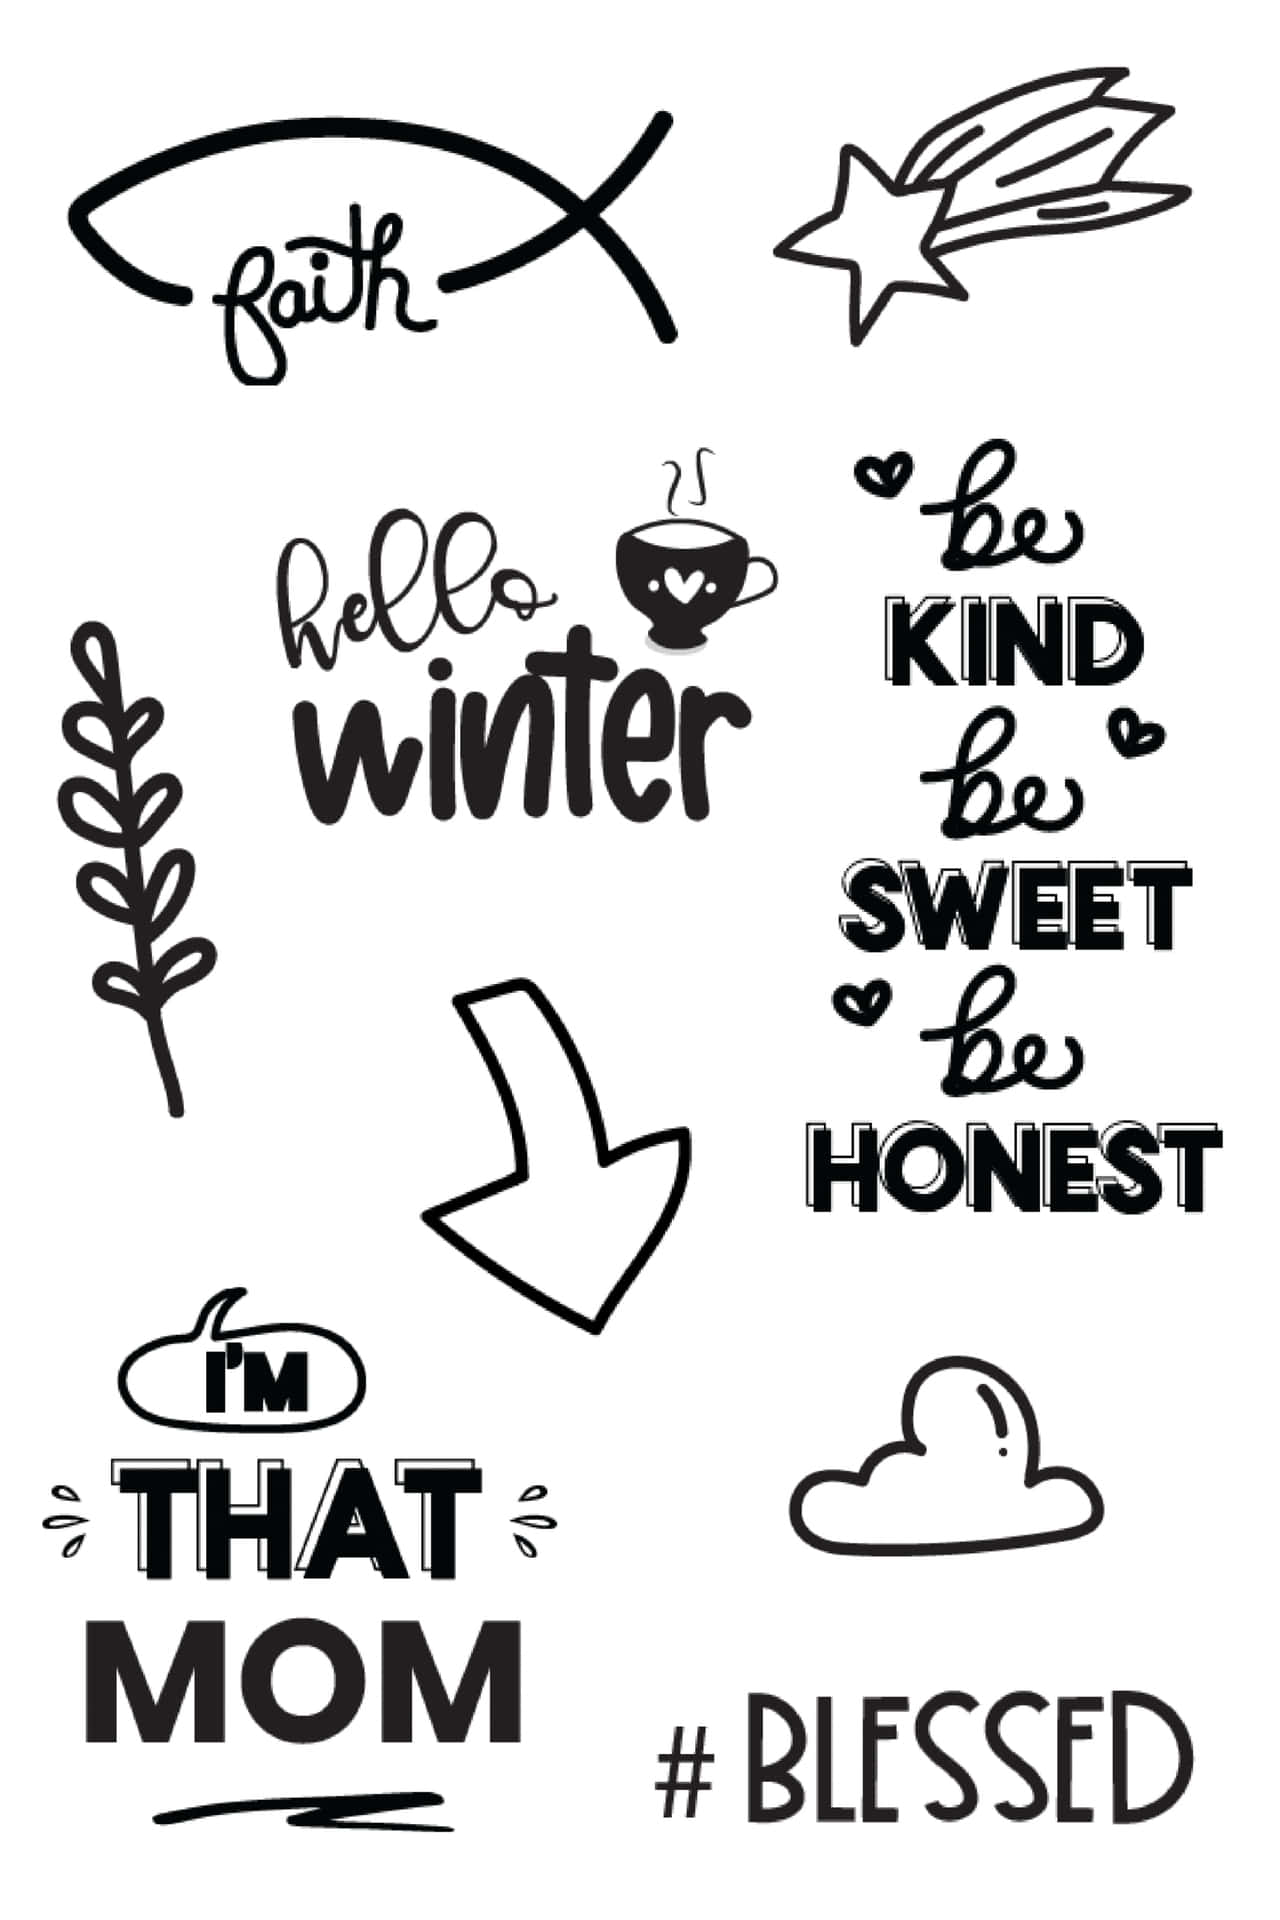 A Set Of Stickers With The Words Kind, Sweet, Honest, And Blessed